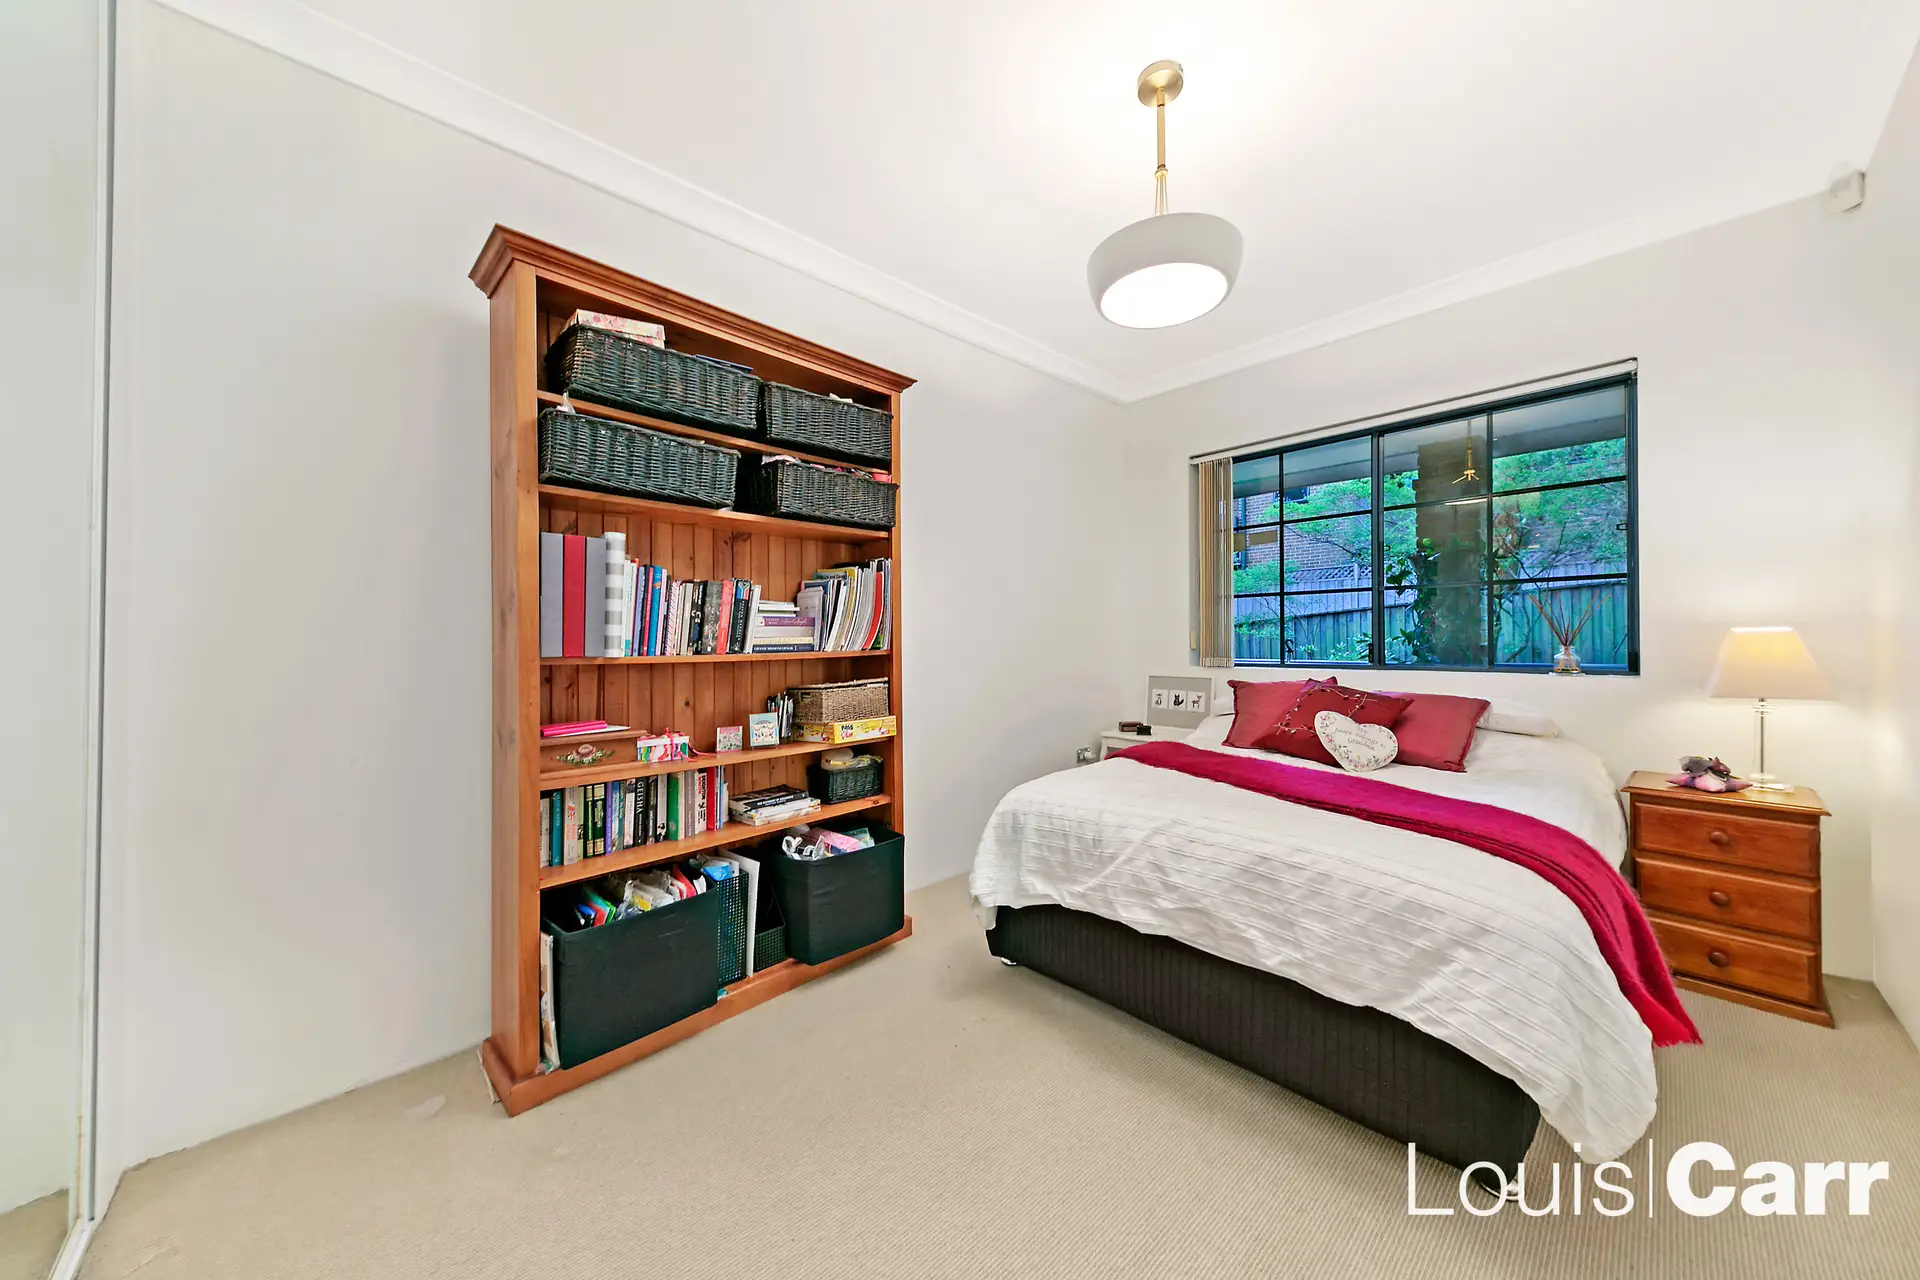 Photo #9: 3/48-54 Cecil Avenue, Castle Hill - Sold by Louis Carr Real Estate